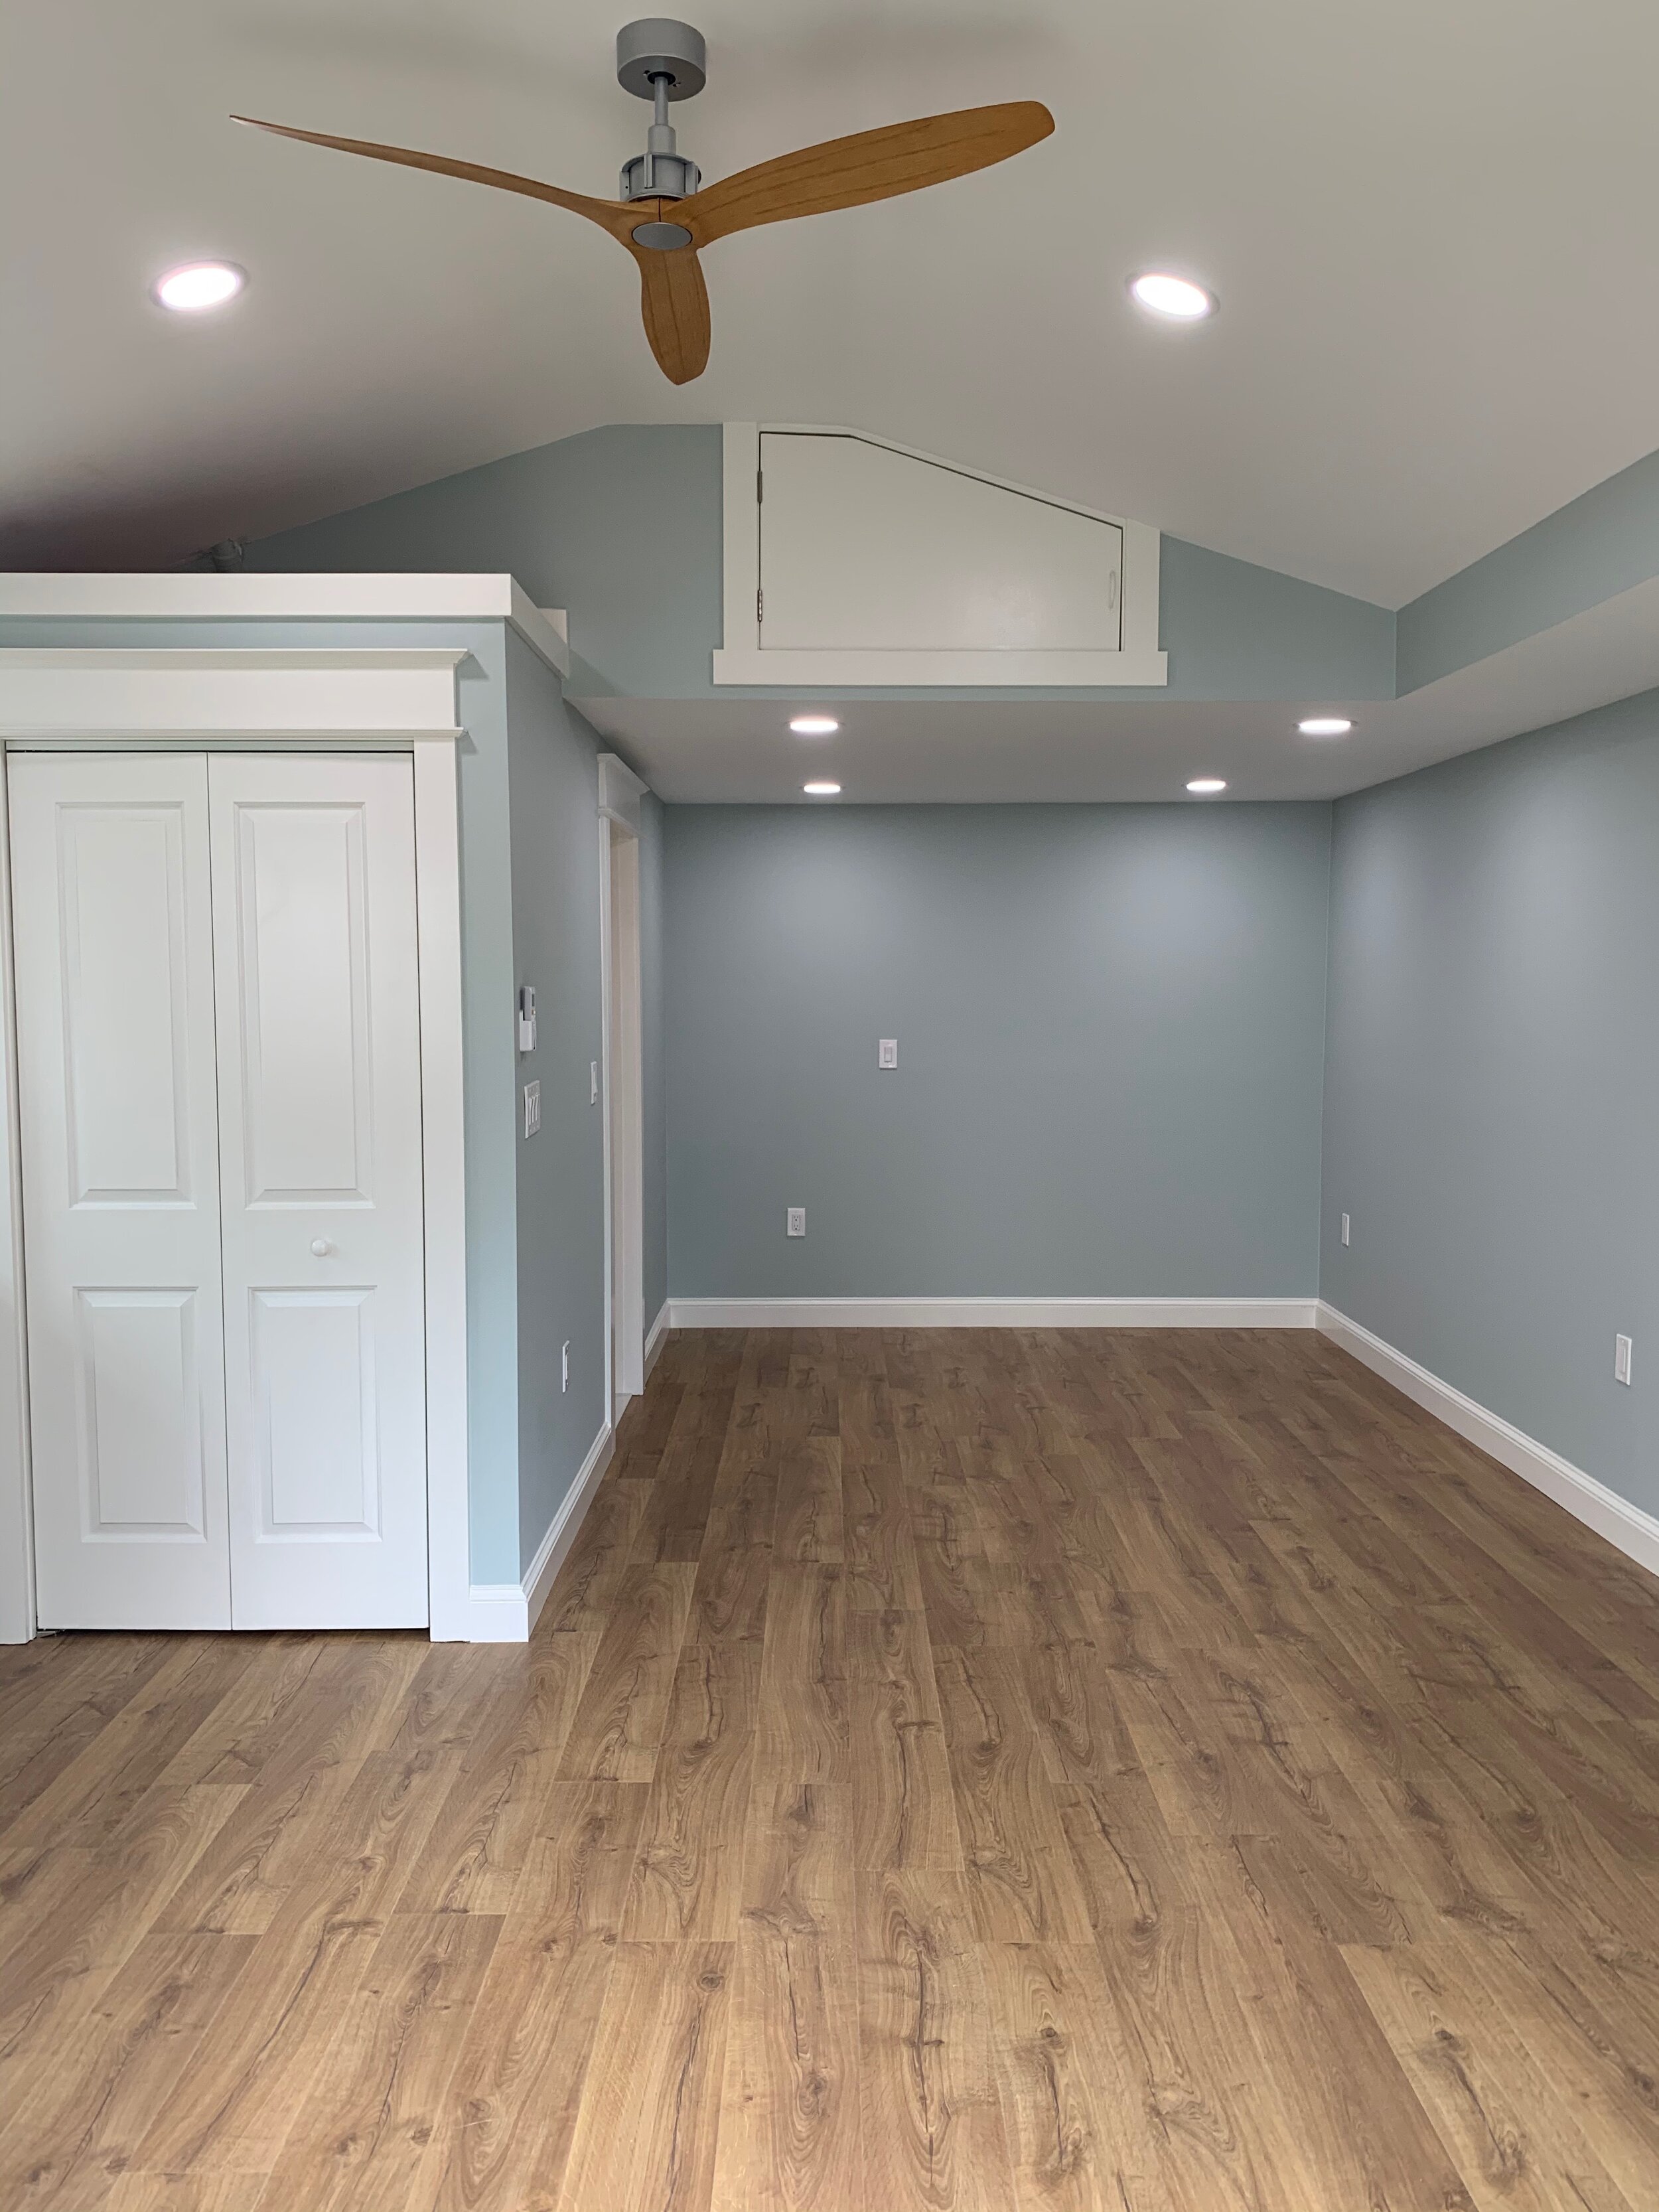  Room Remodeled: Insulation, Floors, Lights, Drywall, and Paint 